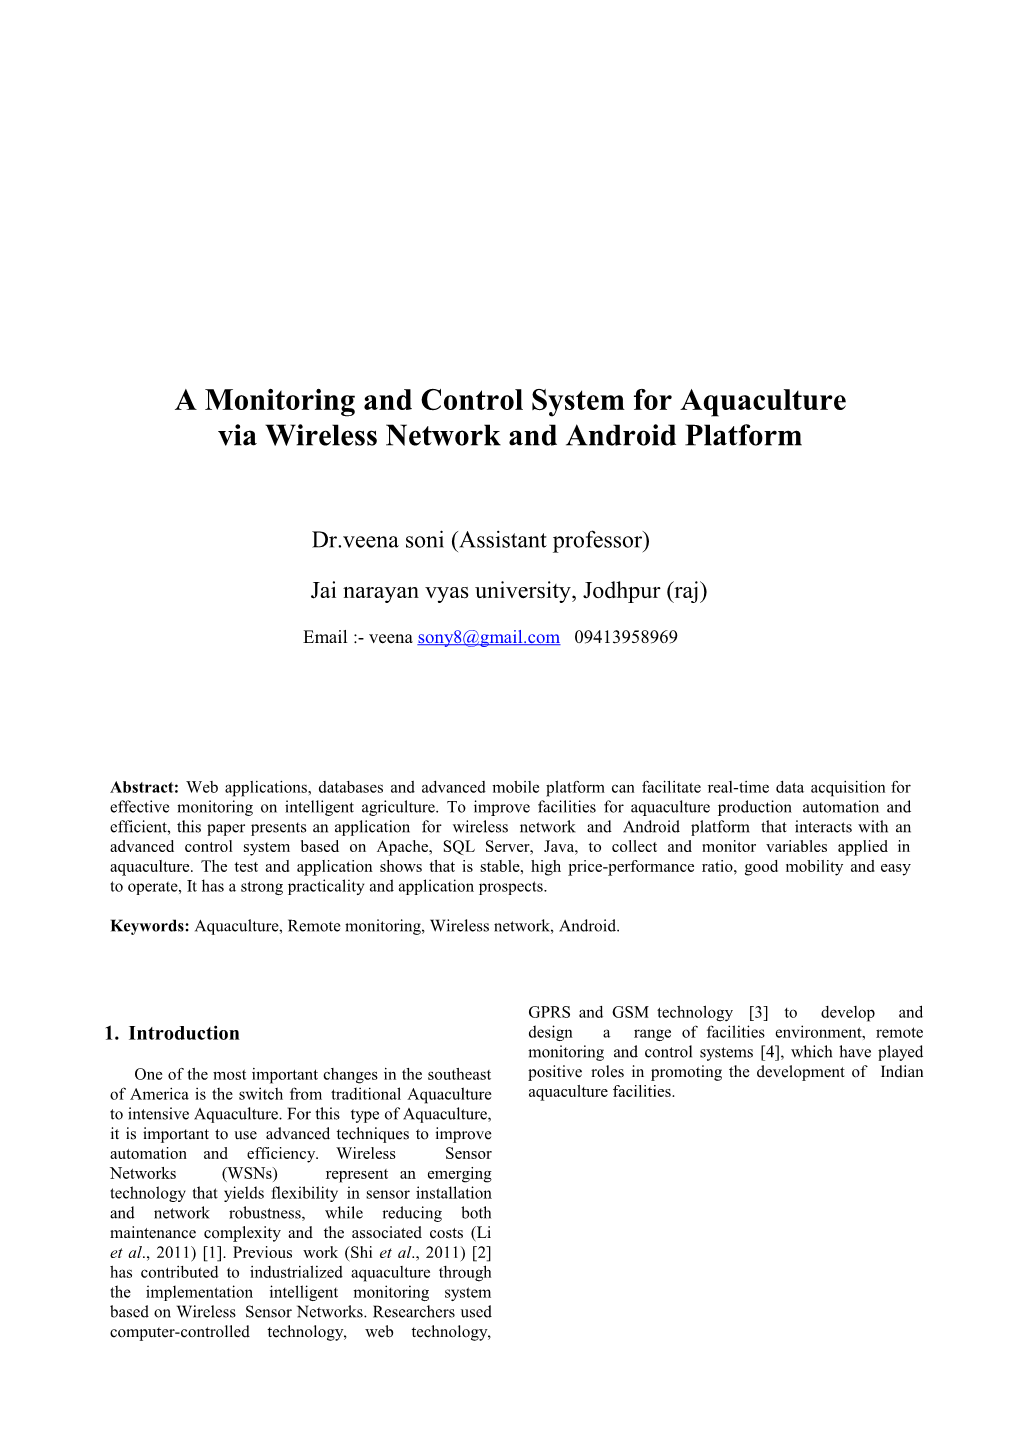 A Monitoring and Control System for Aquaculture Via Wireless Network and Android Platform